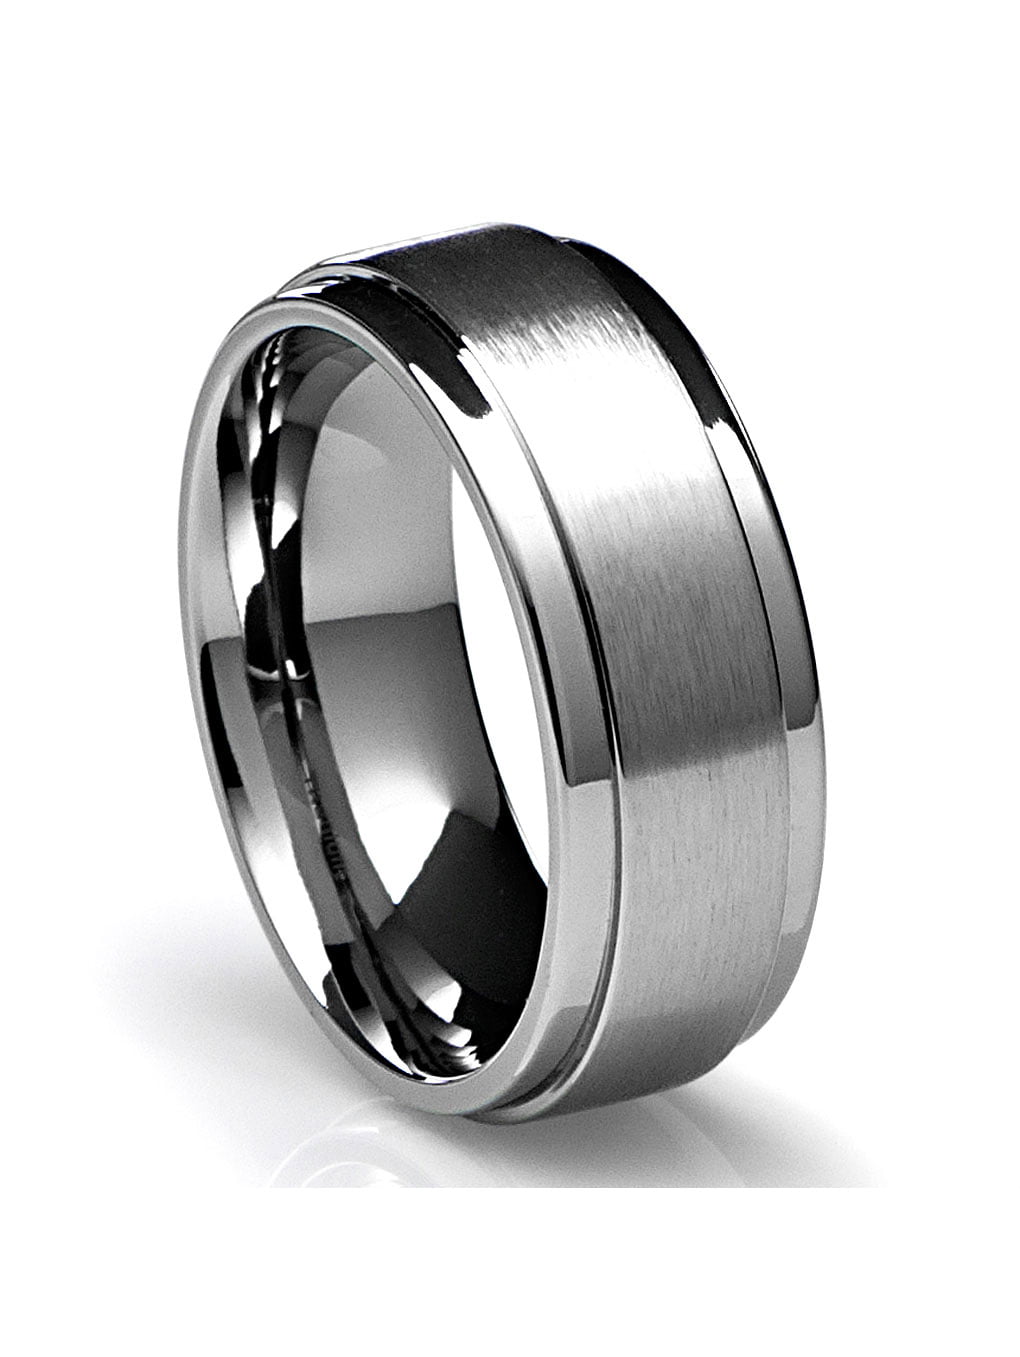 Mens Wedding Band in Titanium 8MM Ring with Flat Brushed Top and ...